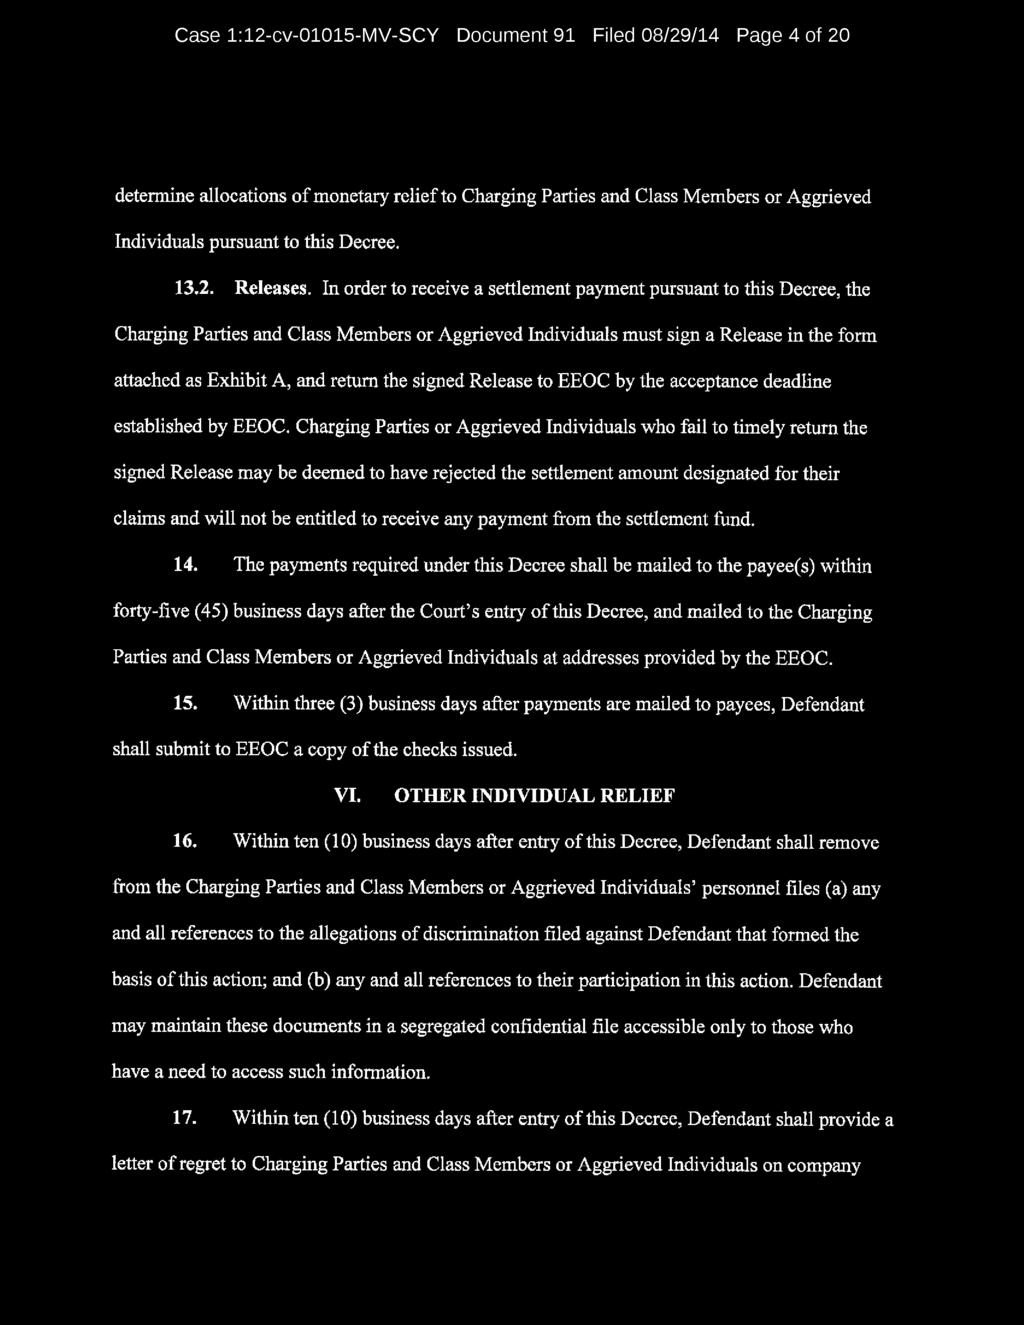 Case 1:12-cv-01015-M V-SC Y Docum ent 91 Filed 08/29/14 Page 4 of 20 determine allocations of monetary relief to Charging Parties and Class Members or Aggrieved Individuals pursuant to this Decree.